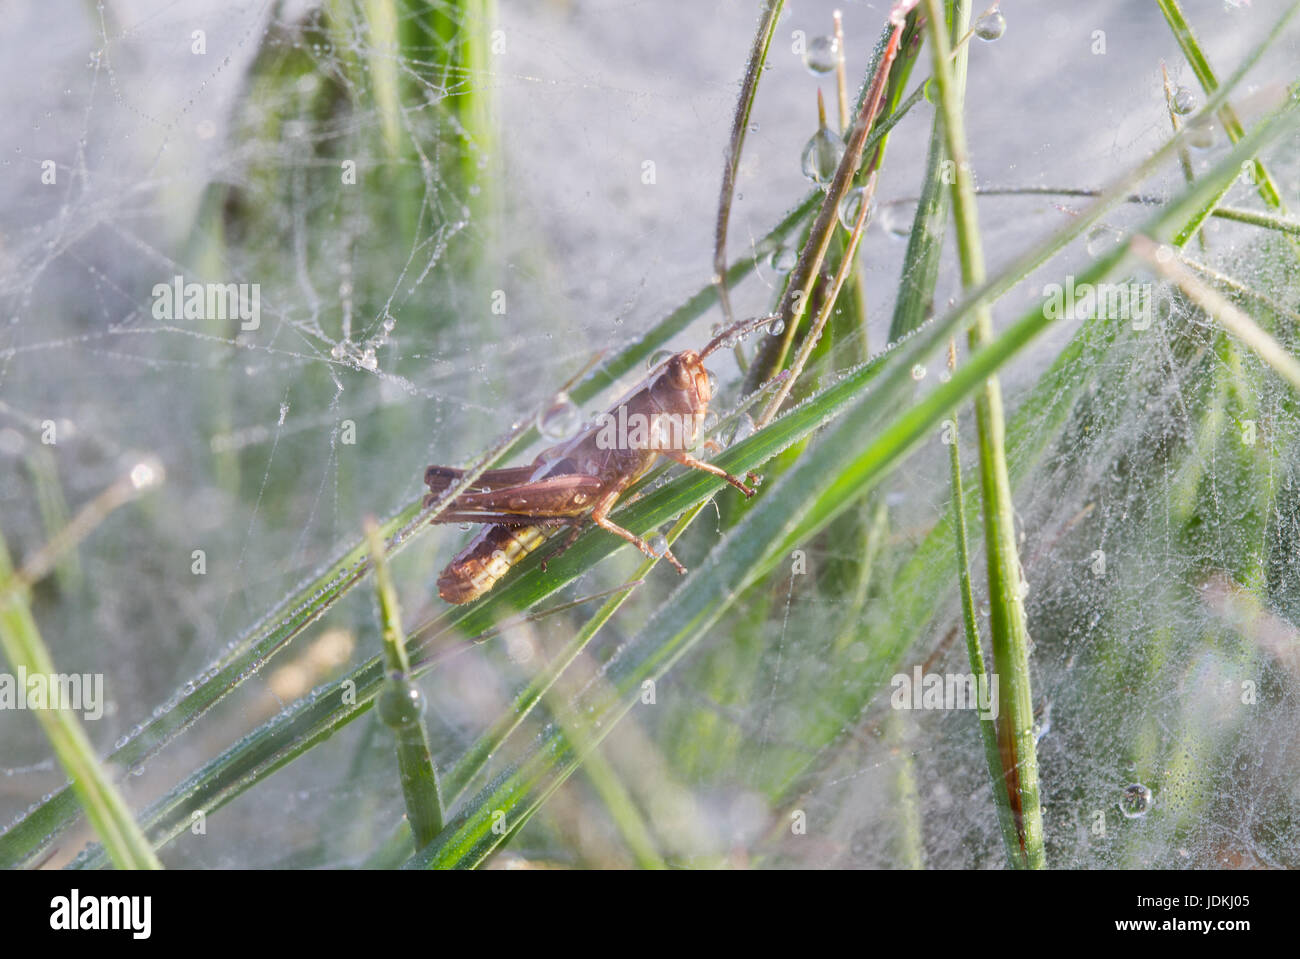 Small Grasshopper escapes from the dewy flat plate web of a Funnel-web spider, probably Agelena labyrinthica Stock Photo